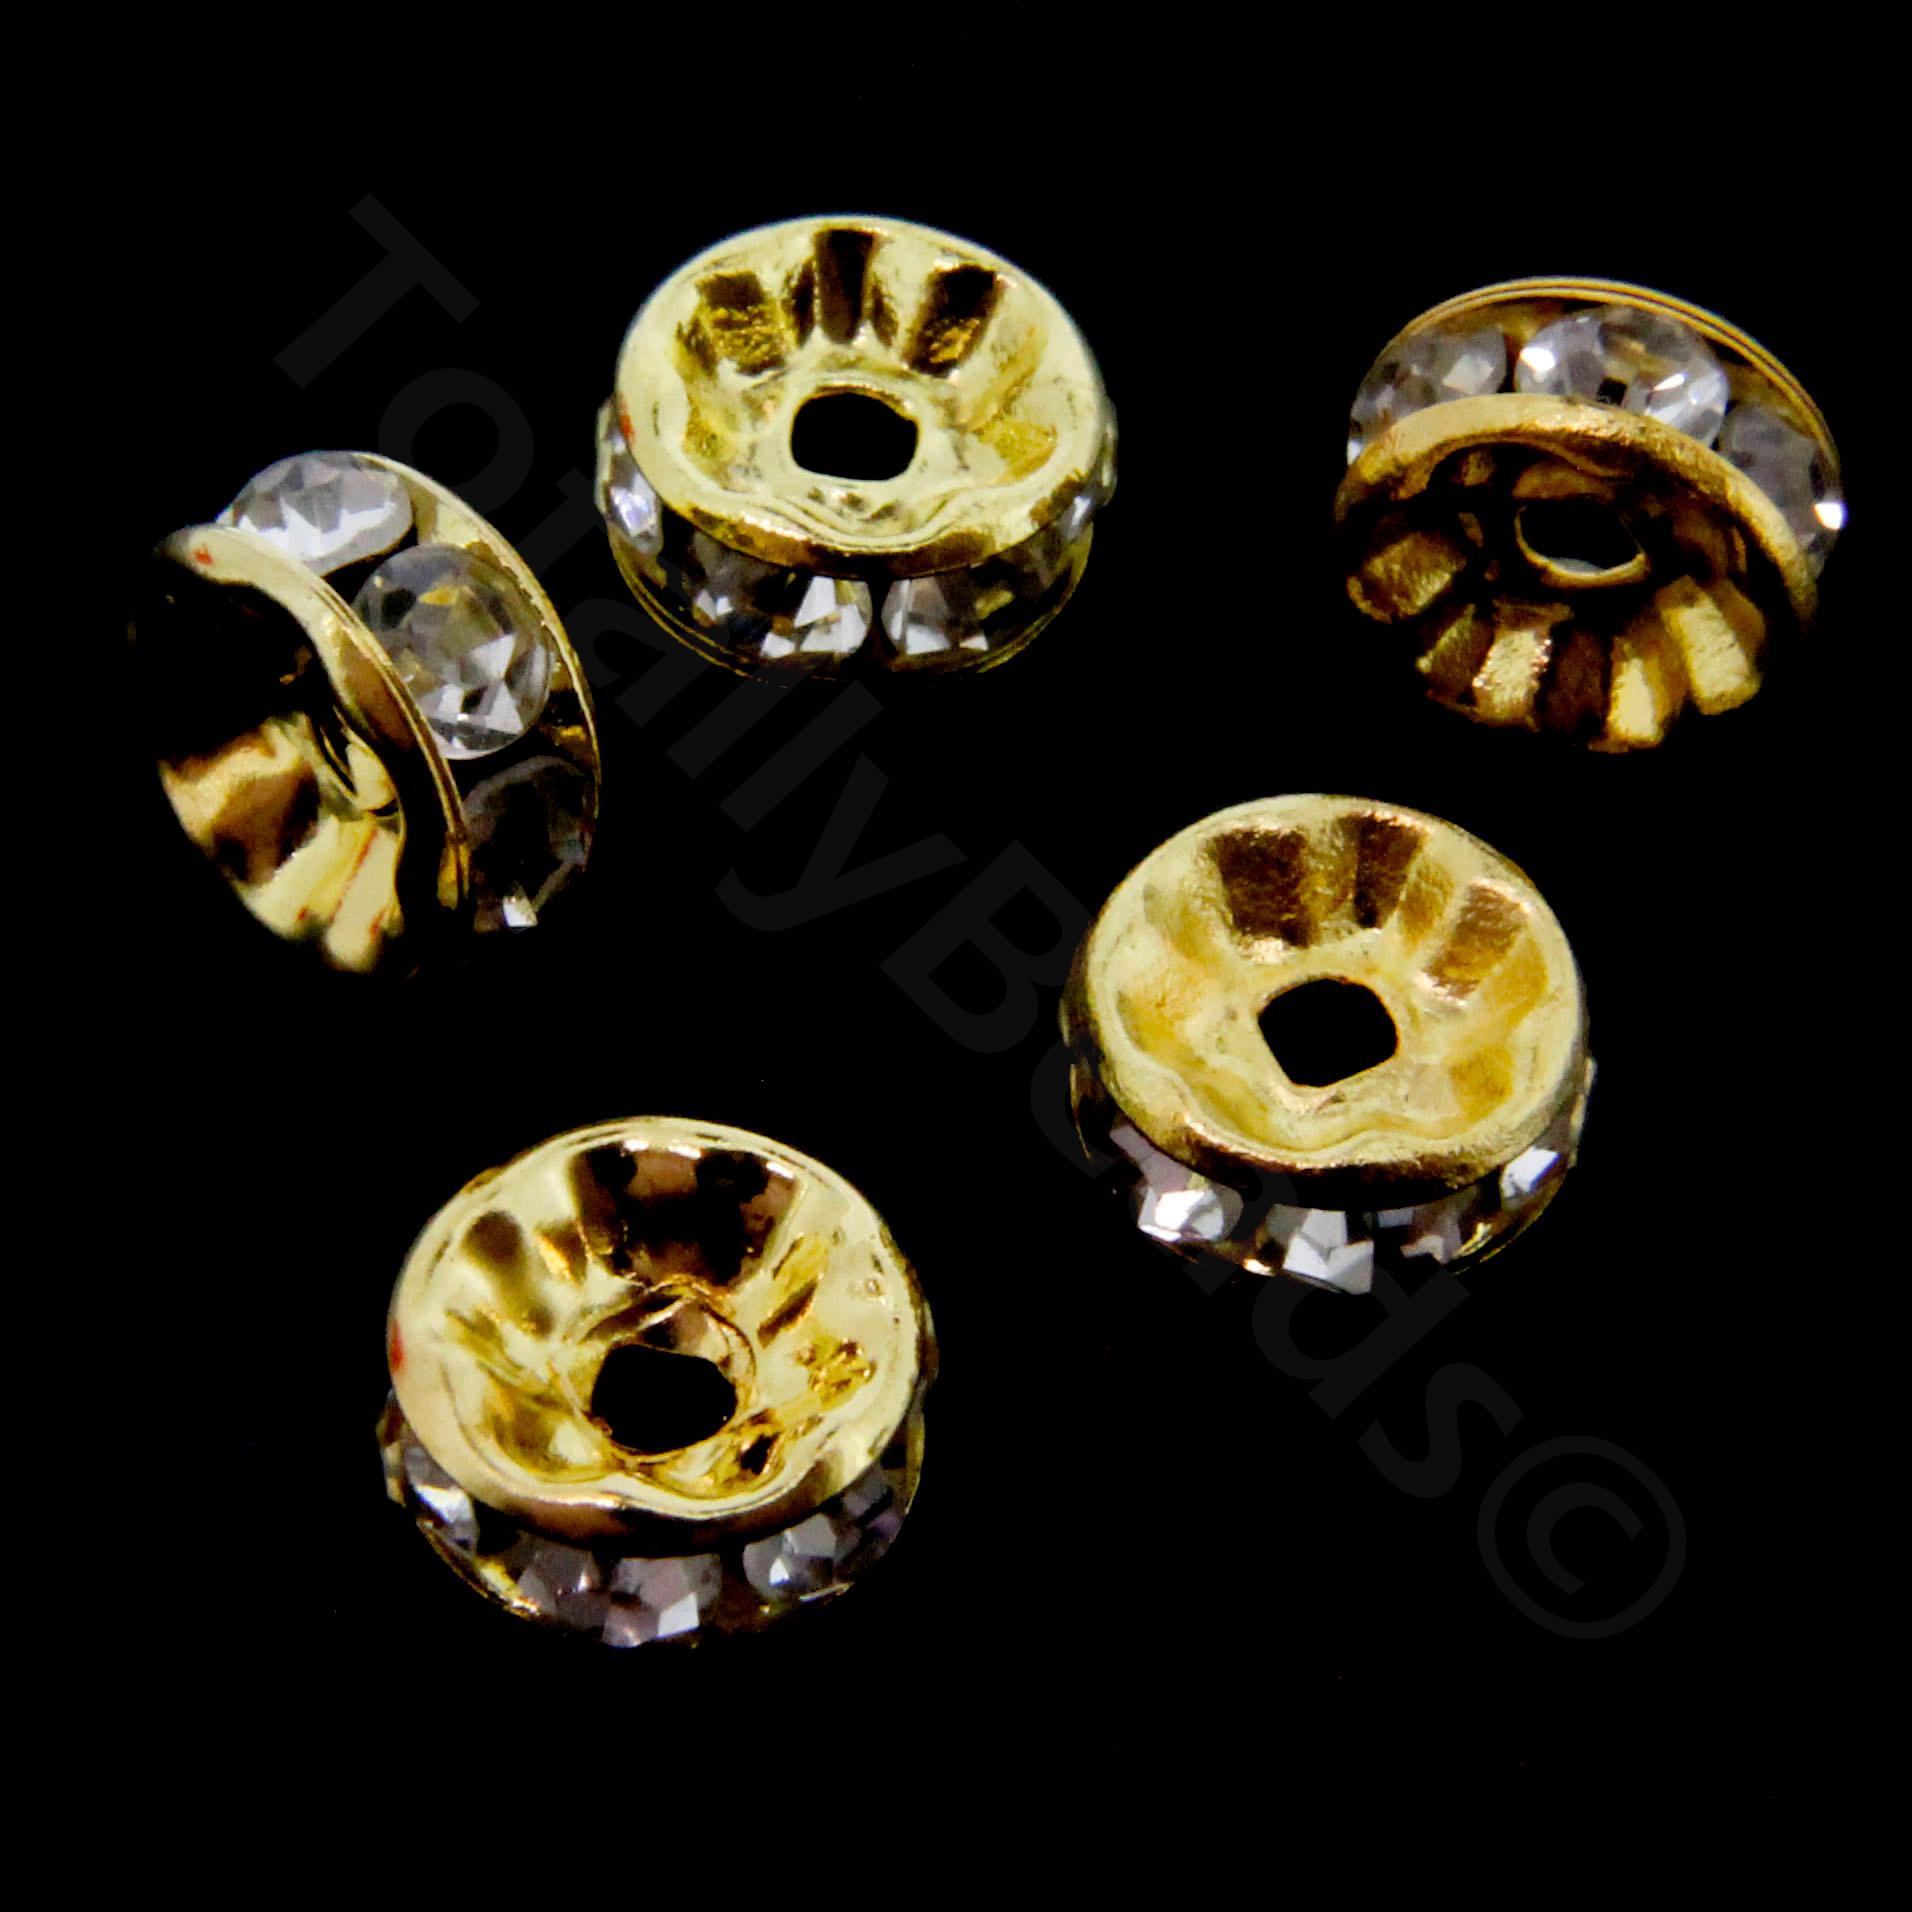 Crystal Diamante Gold Spacer - Flat Rondelle 8mm Crystal 20 pcs